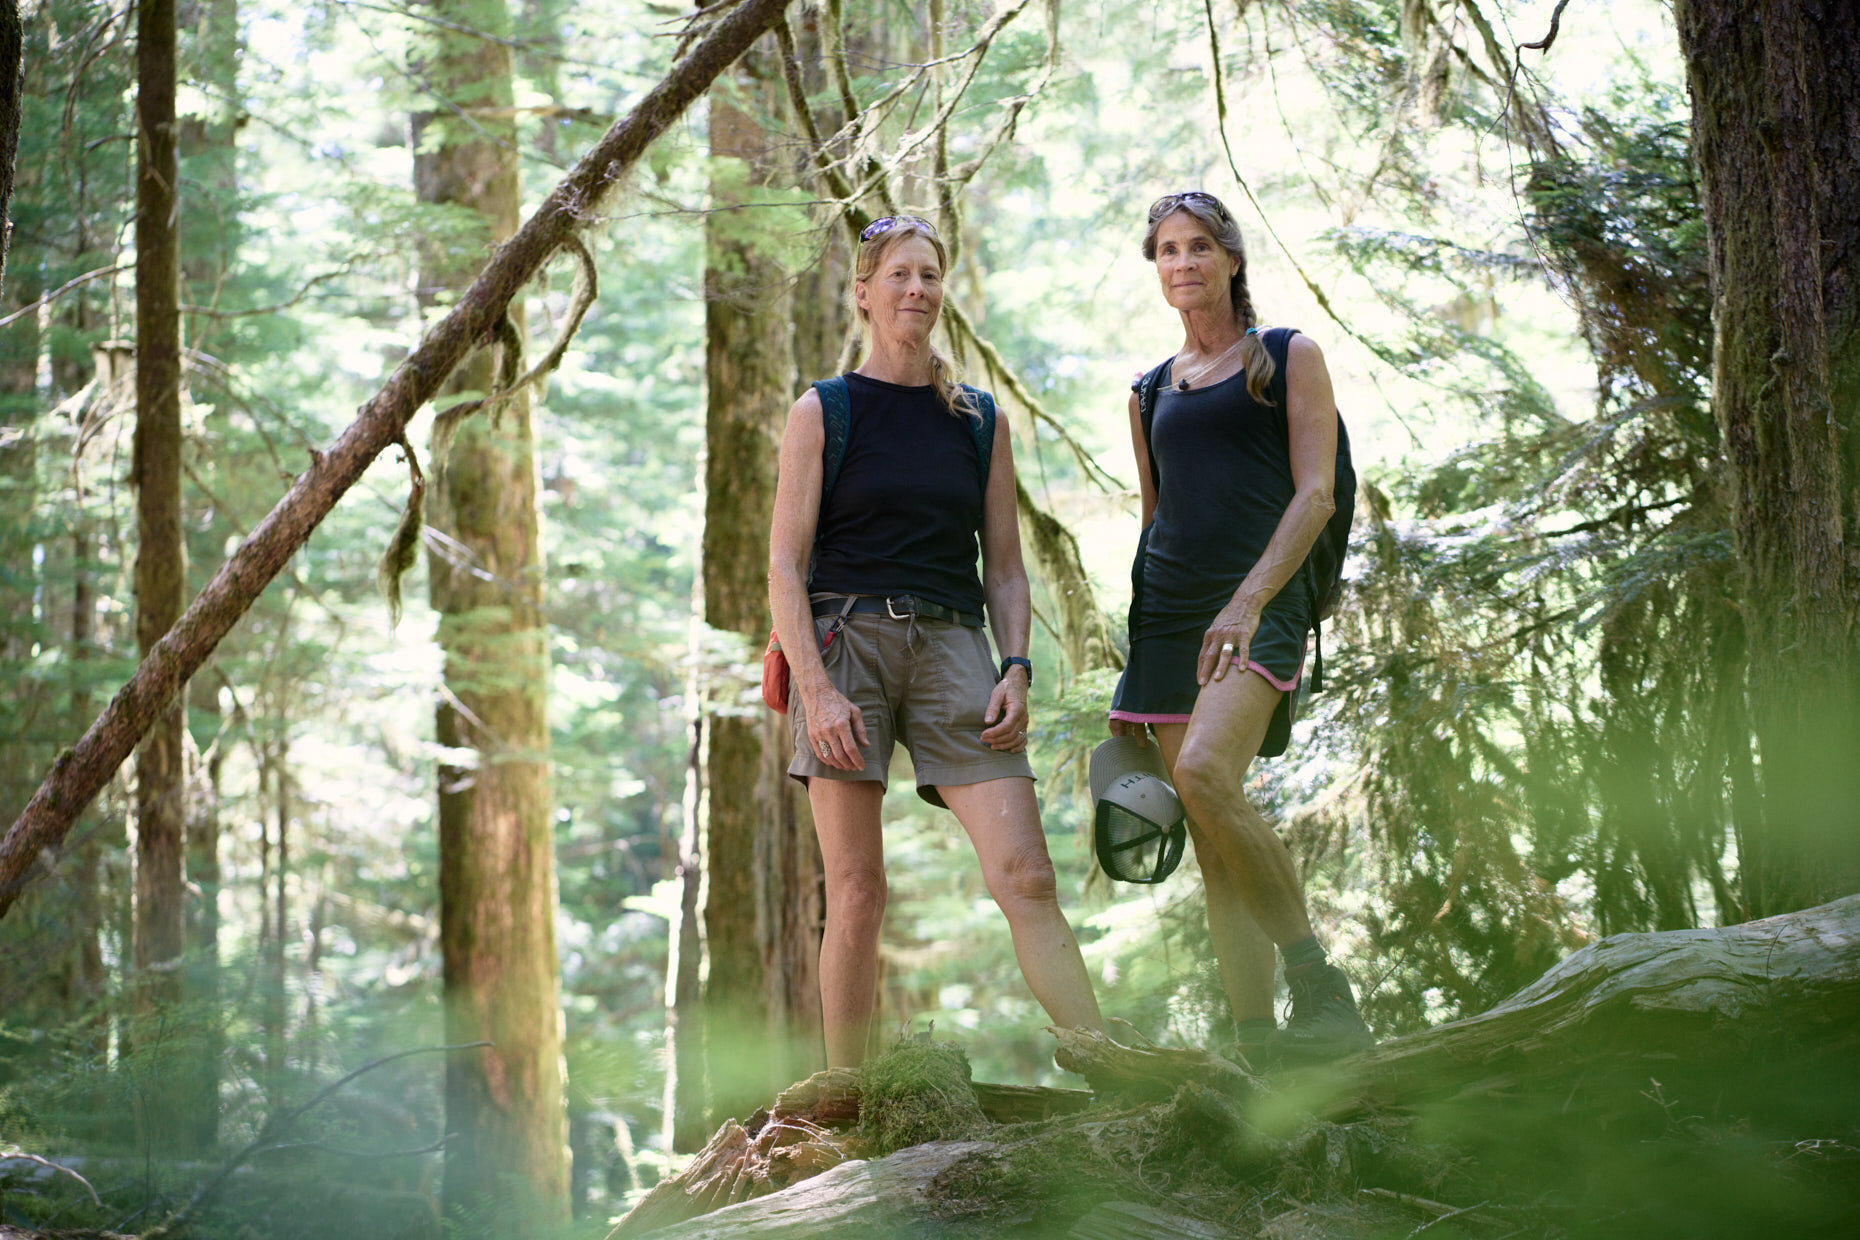 &quot;Cool people i met while roaming the backroads of Vancouver Island&quot;, Part 2: 

Andrea &amp; Shelley, sisters.  I met them at a trailhead as we parked our aging camper vans next to each other. These sisters grew up in Vancouver before it bec